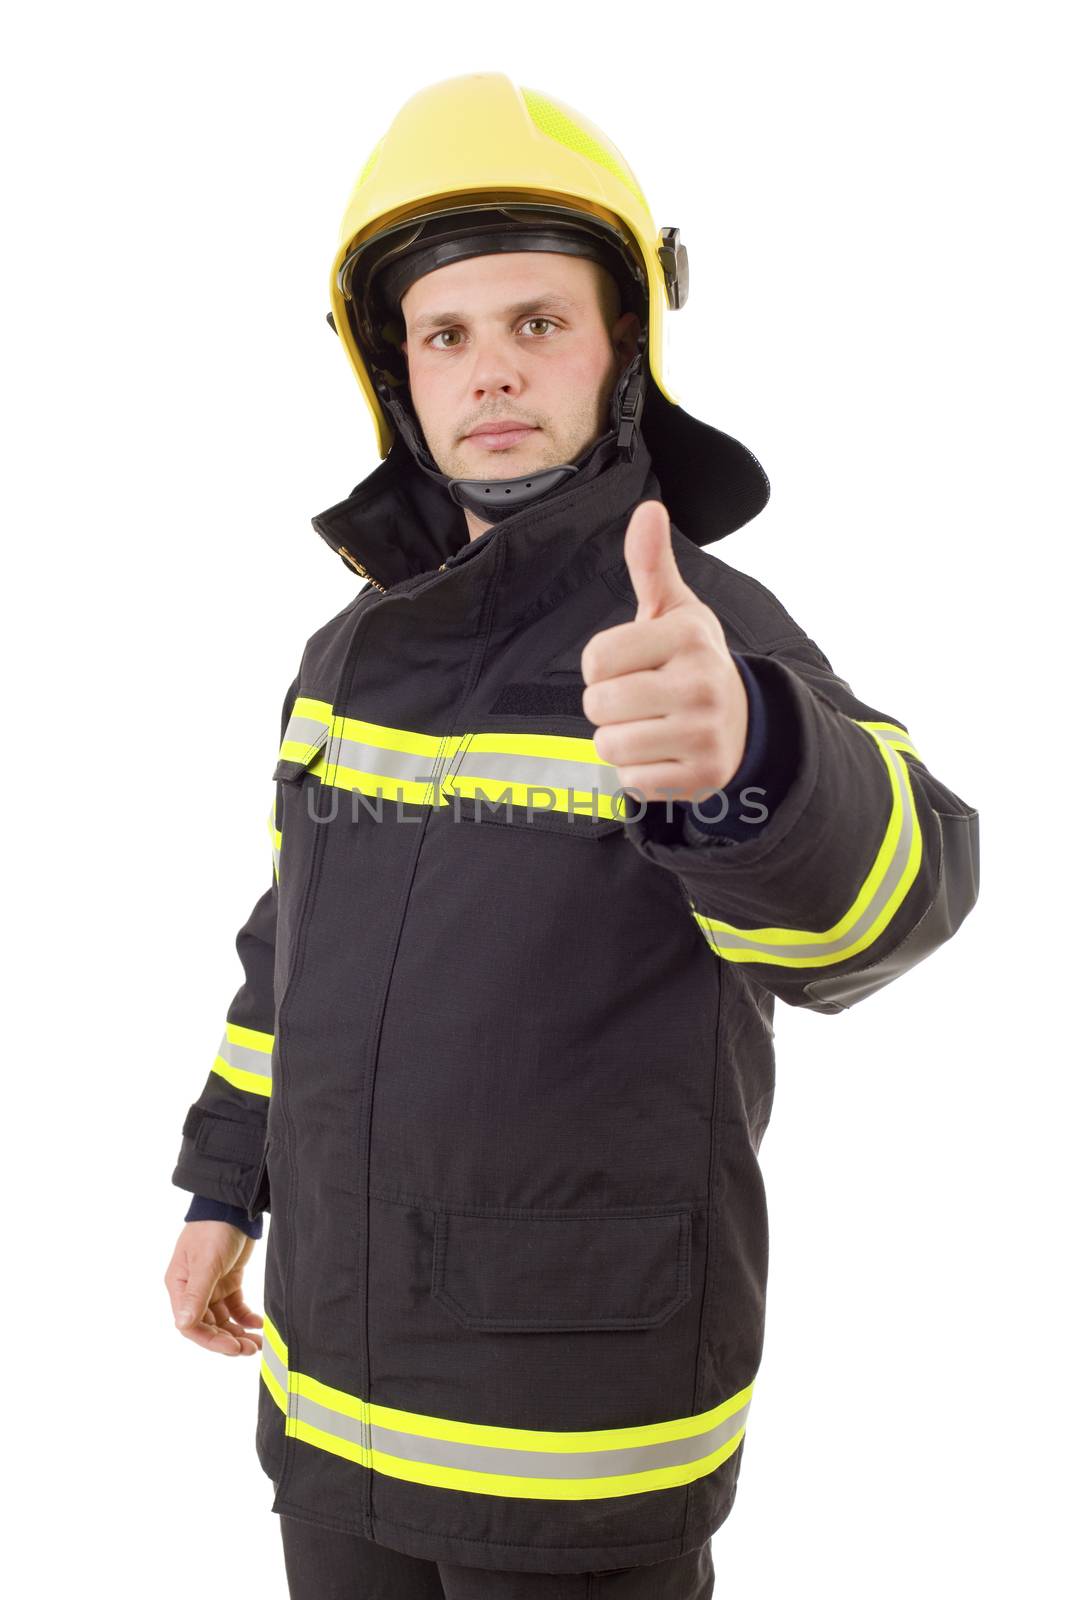 fire fighter going thumb up, isolated on white background